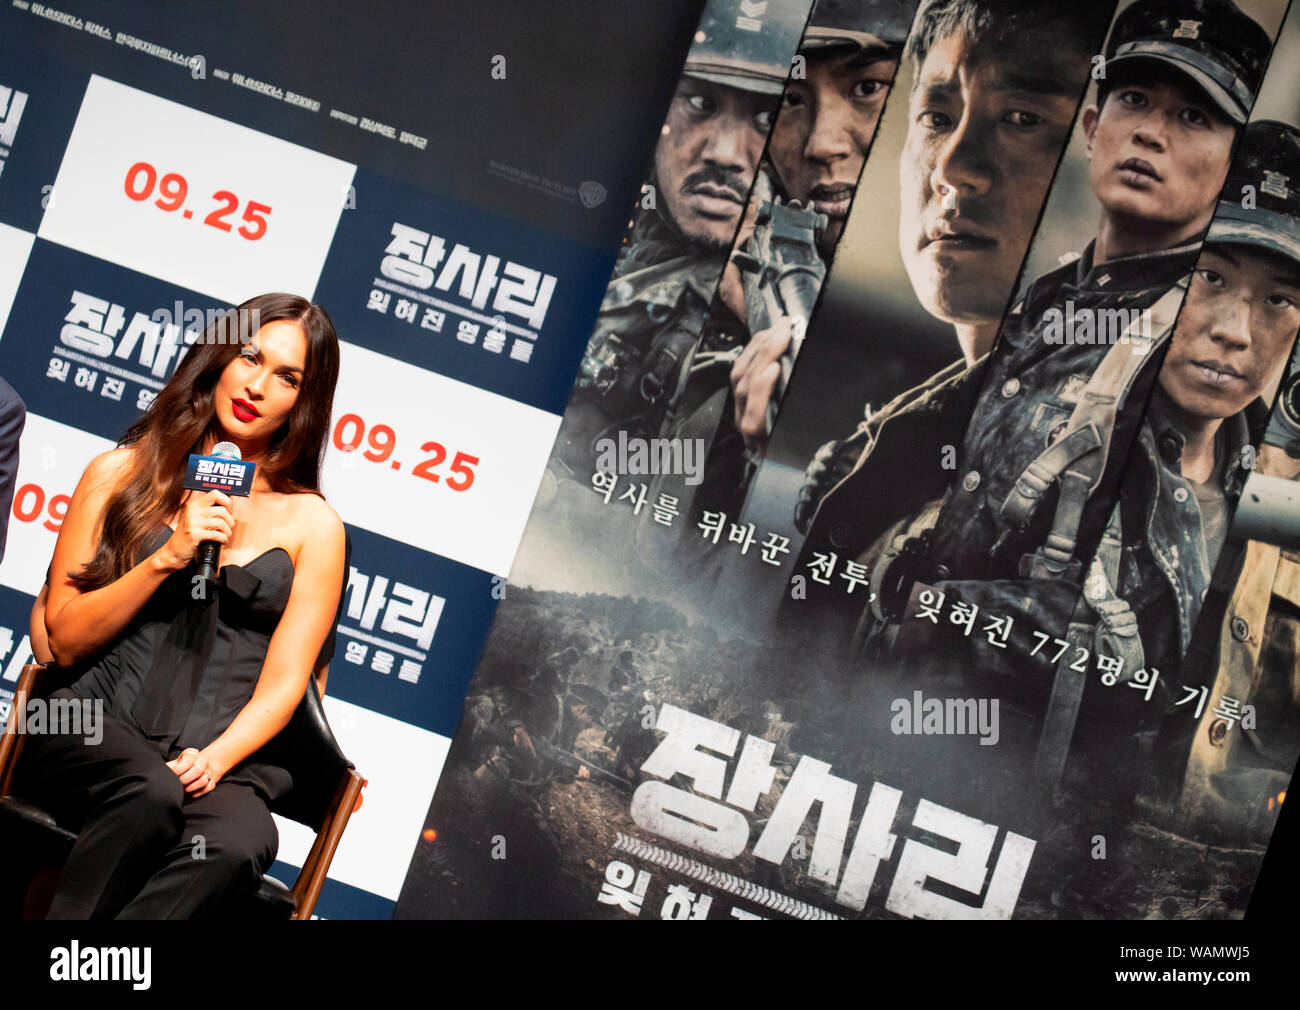 Megan Fox, August 21, 2019 : Hollywood star Megan Fox attends a showcase for her new movie 'Battle of Jangsari' at a theater in Seoul, South Korea. The Korean movie tells the story of a group of 772 South Korean student soldiers who fought against North Korea during the 1950-53 Korean War. It will hit local Korean screens on September 25. Credit: Lee Jae-Won/AFLO/Alamy Live News Stock Photo